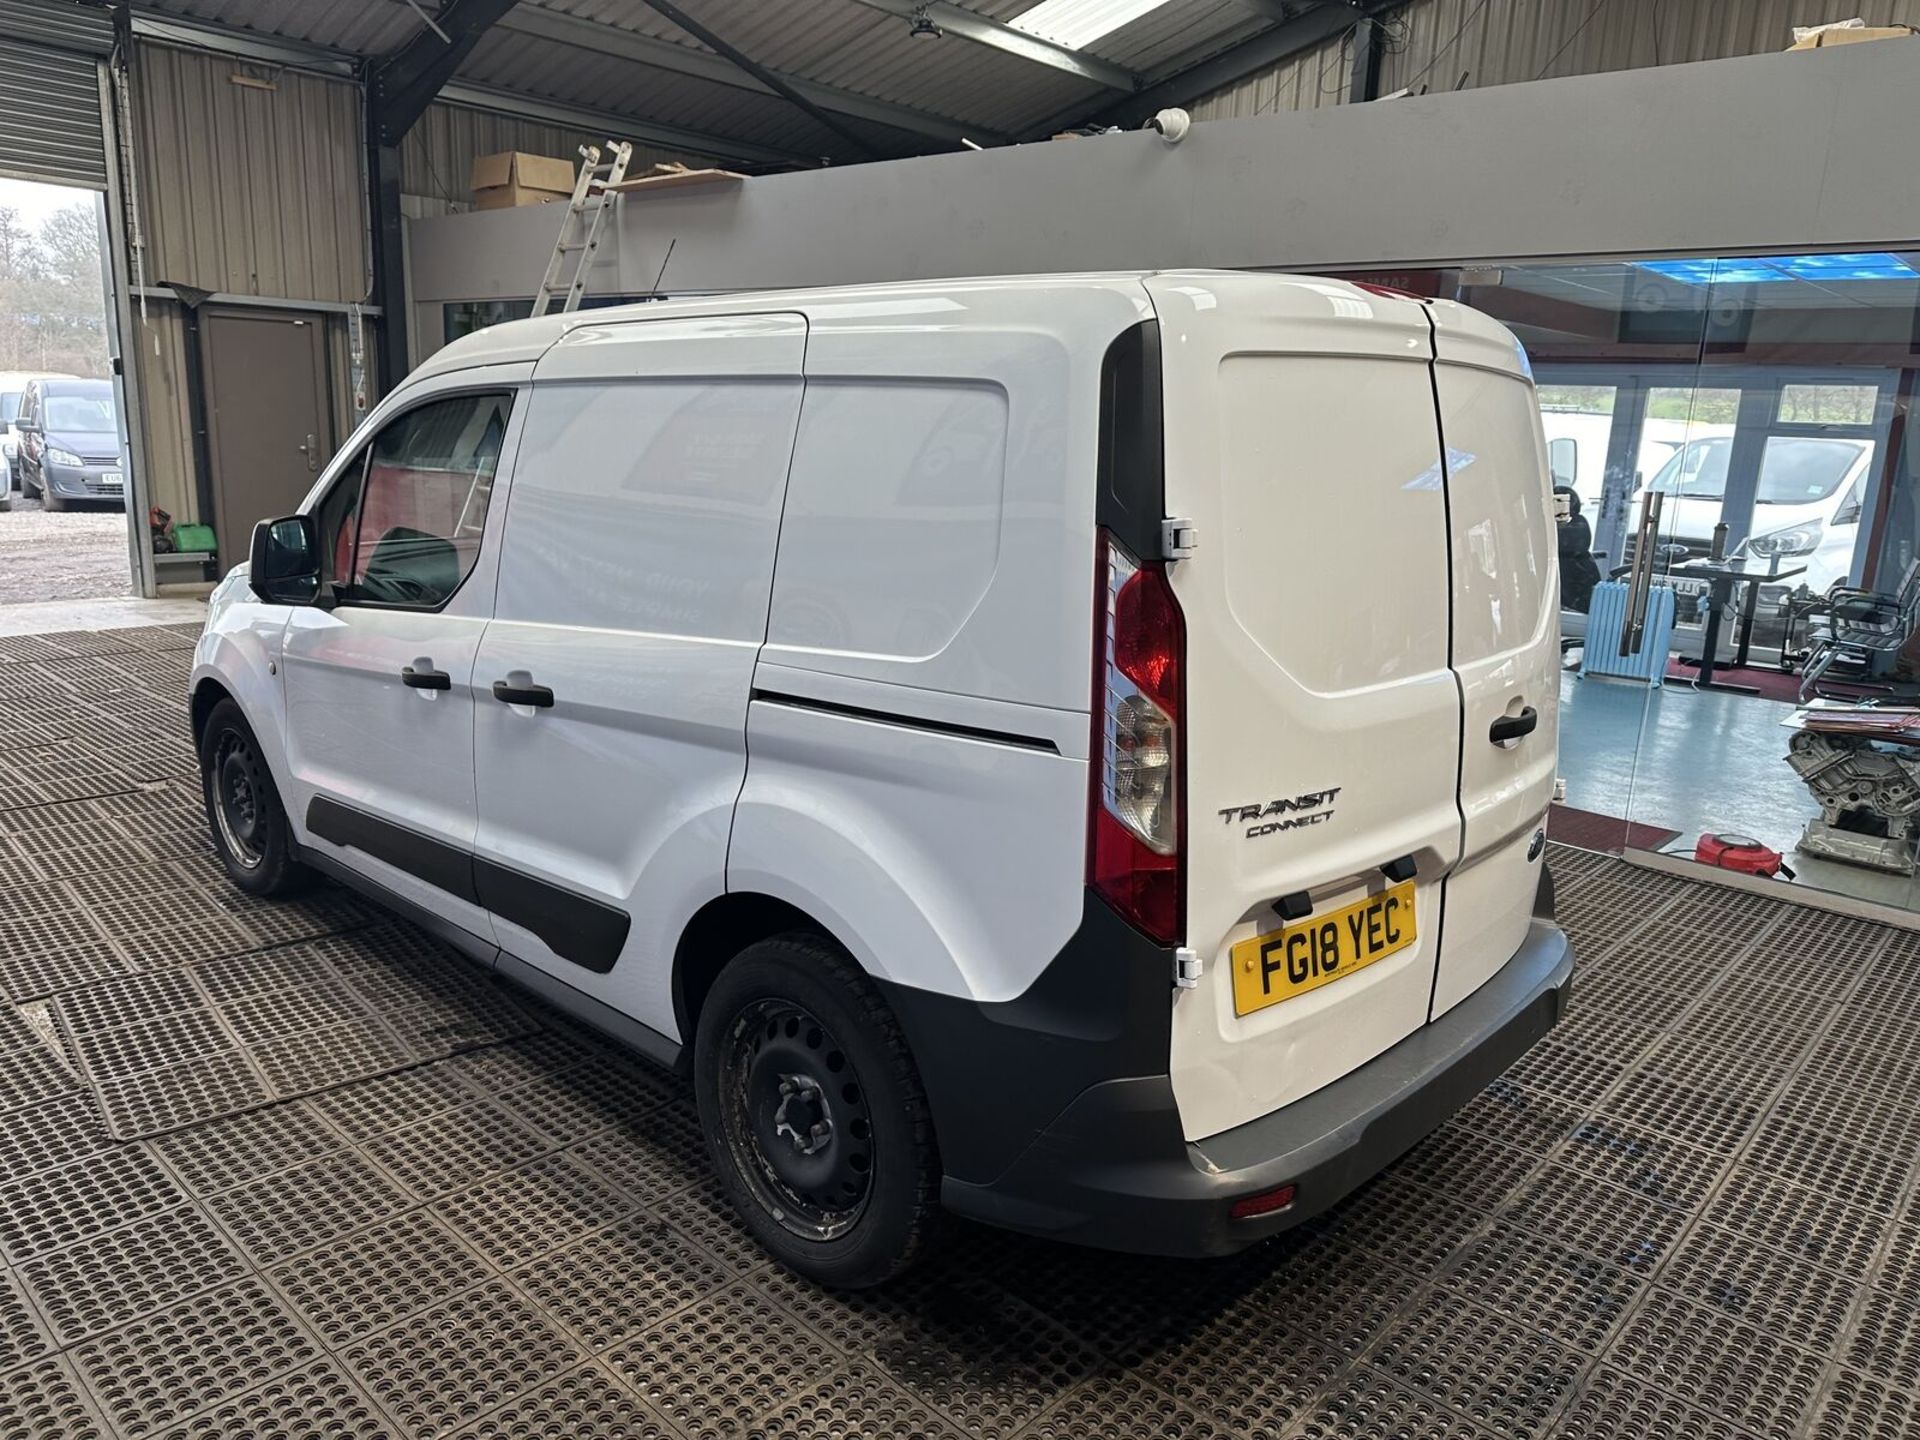 TRUSTY TRANSIT: LOW MILEAGE 2018 CONNECT, WORK-READY - Image 12 of 12